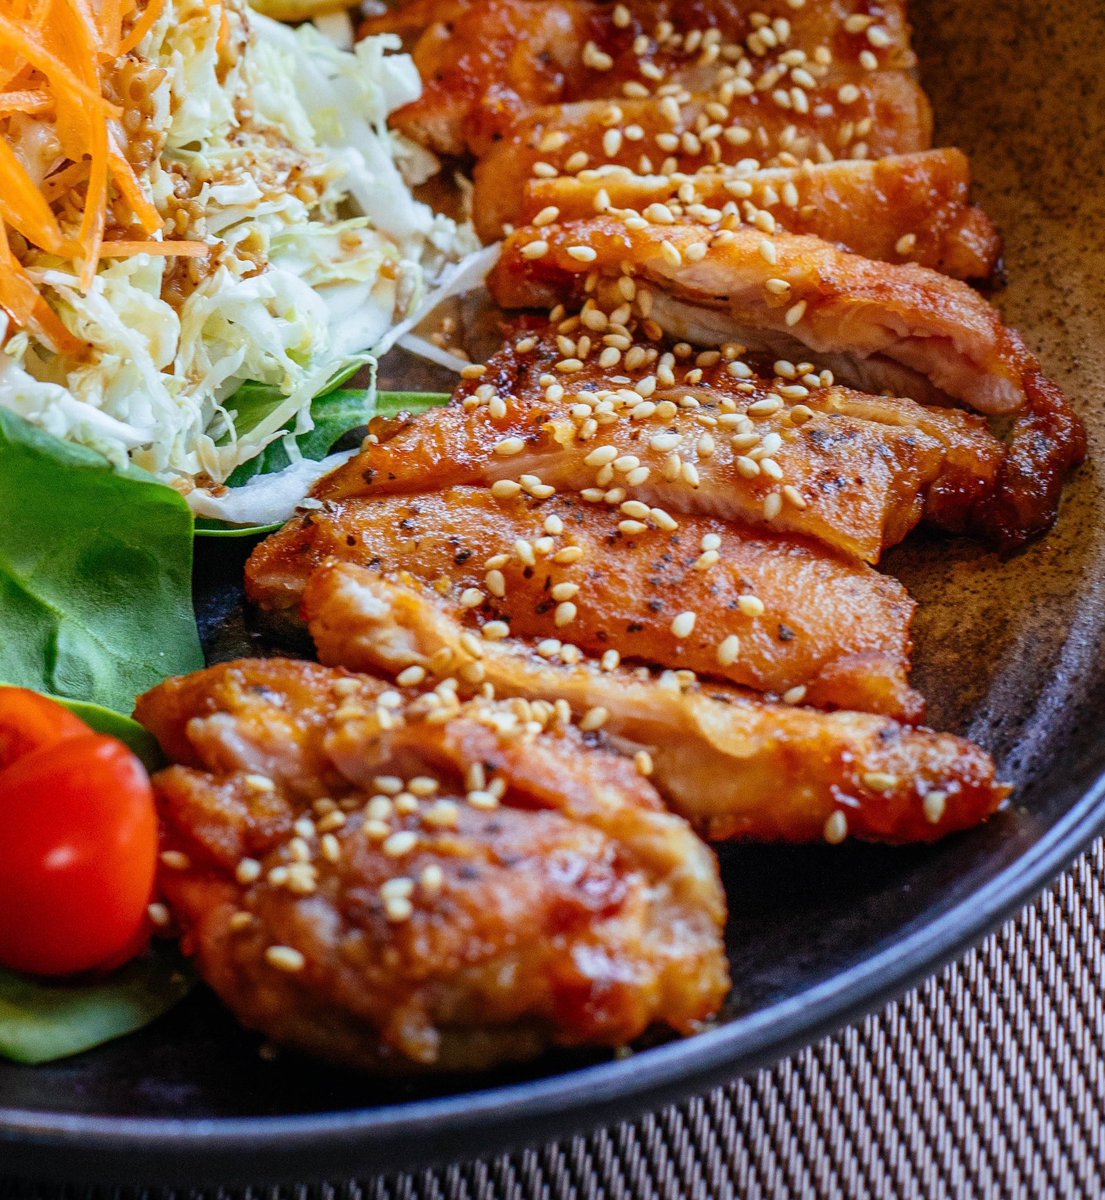 Slow Cooker #Teriyaki Chicken. Only 5 ingredients and minimal effort....YOU.Will.Love.This. #SimplyDelliciousPromise. Full Recipe: simplydellicious.com/recipes/teriya… #EasyRecipes #ChickenTeriyaki #EasyDinner